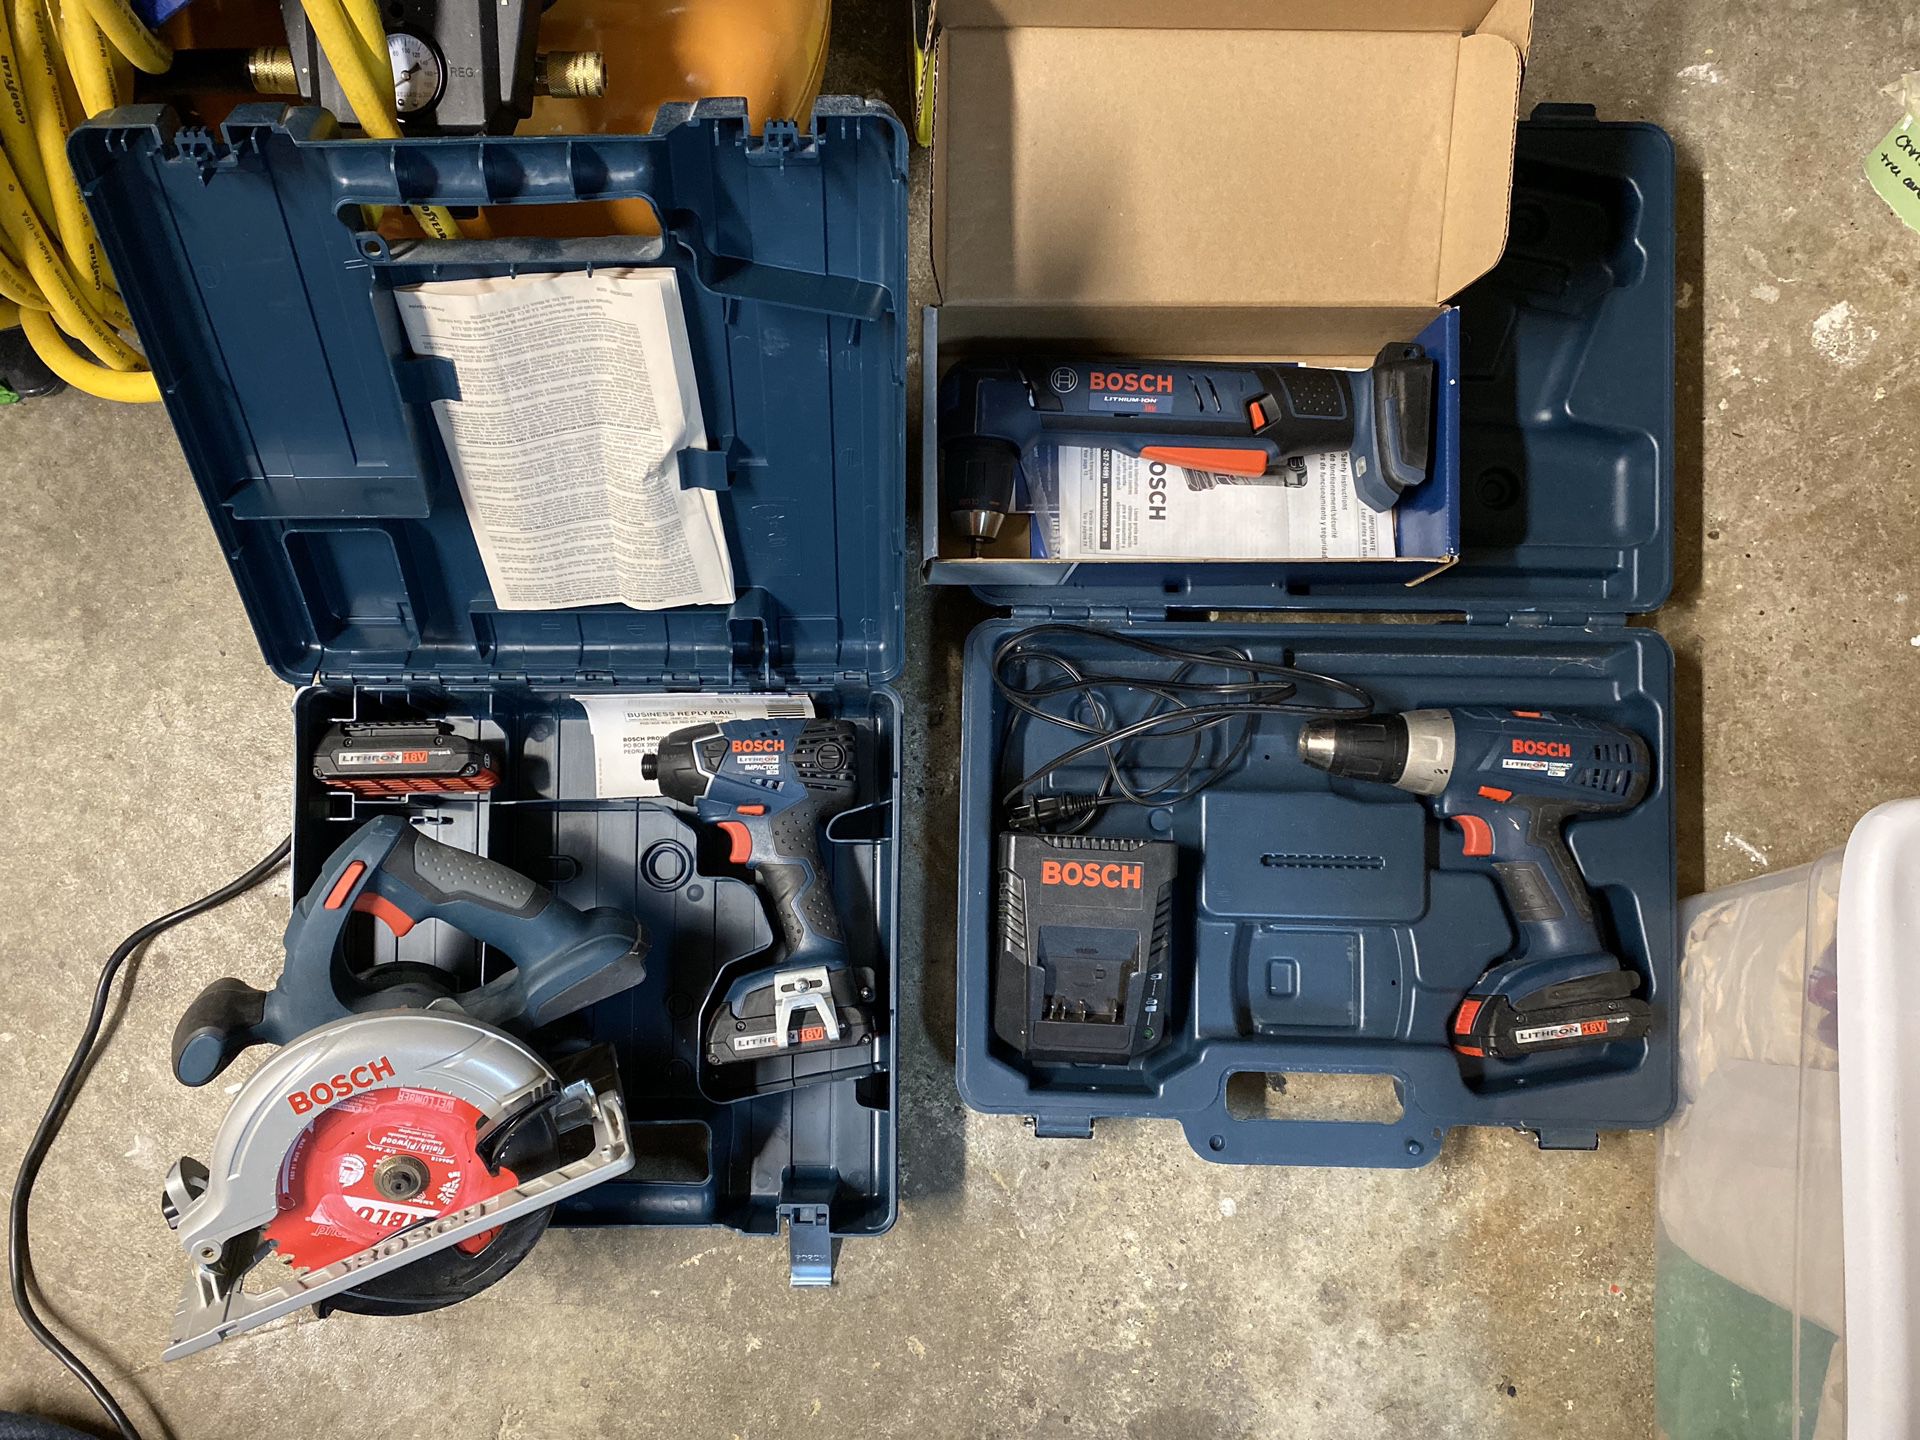 Bosch 18V litheon tools (drill, impact driver, right angle drill, and circular saw)